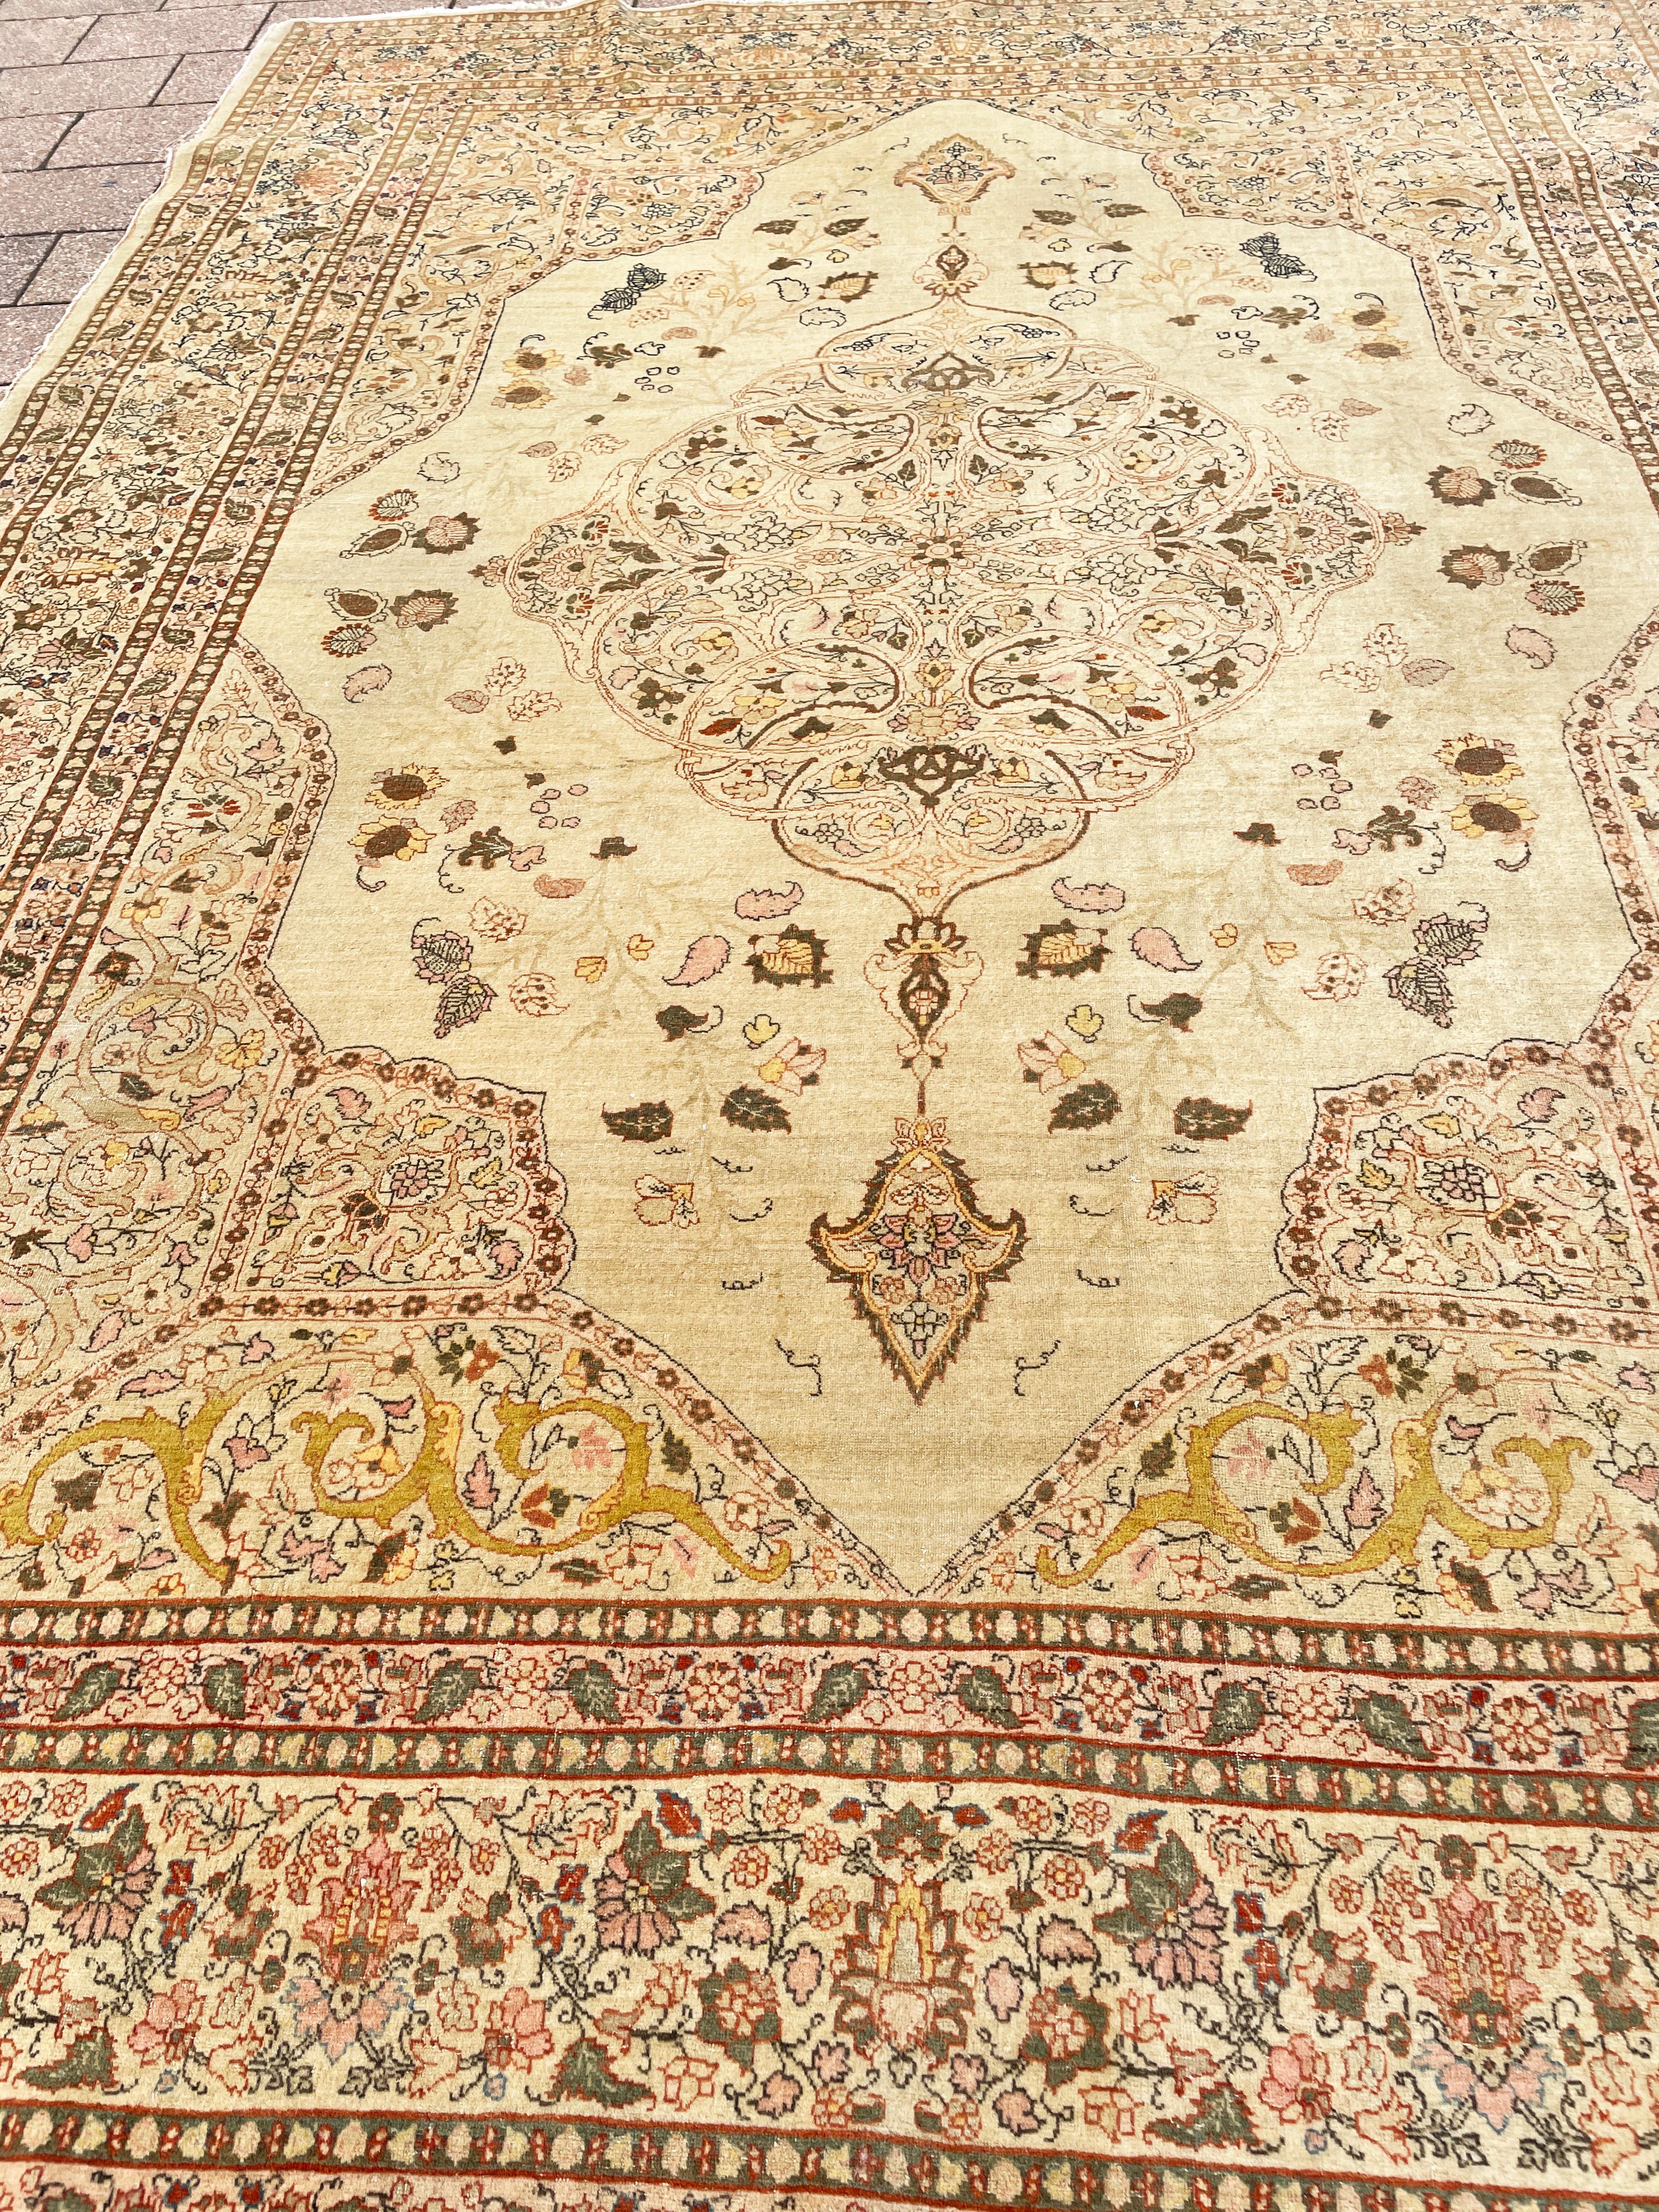 Antique Persian Tabriz Hajji Jalili Carpet, The Best Of Persian Rugs In Excellent Condition For Sale In Evanston, IL